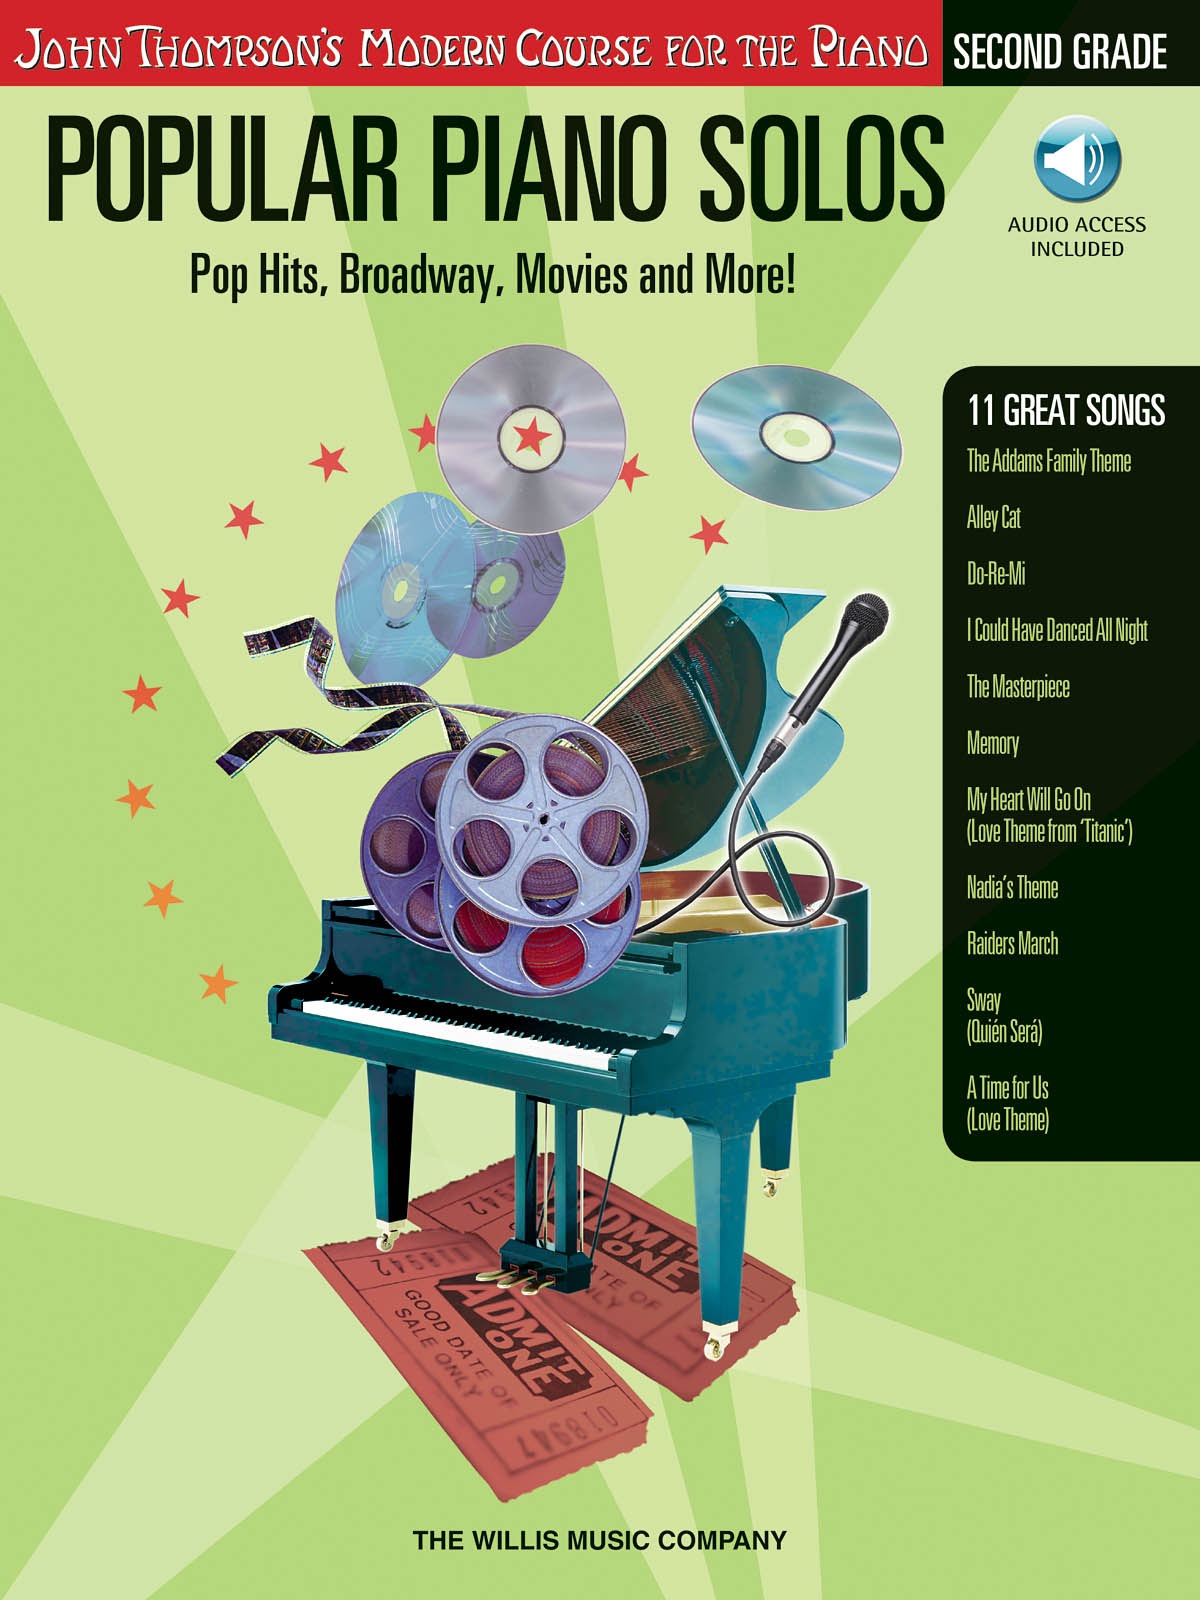 2nd Grade - Pop Hits, Broadway, Movies And More! - Popular Piano Solos